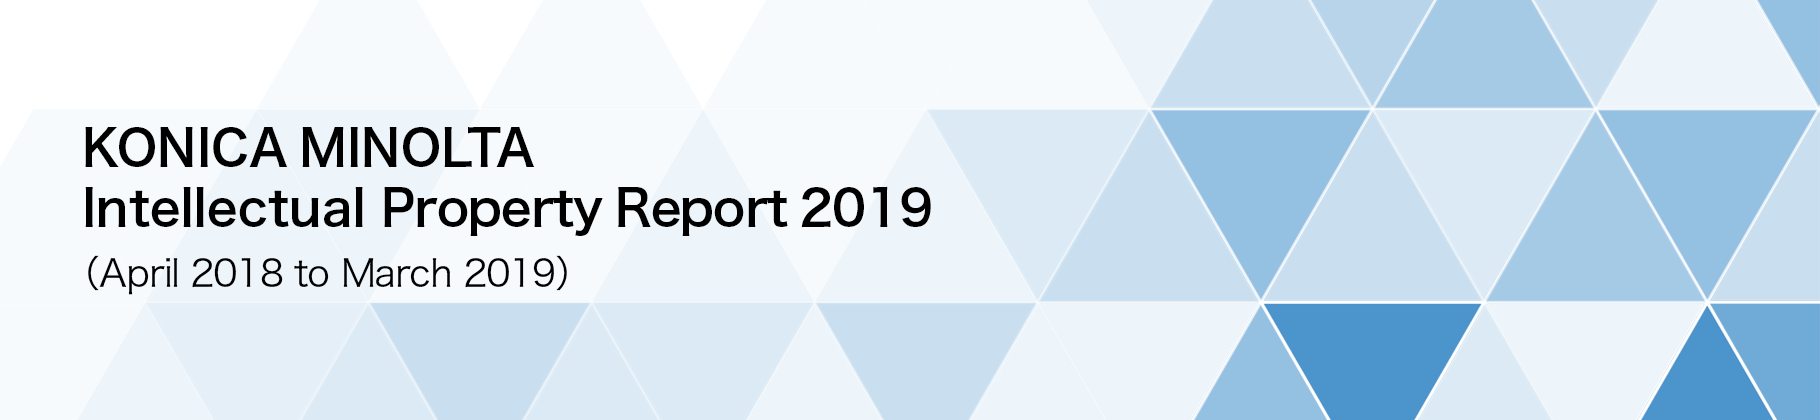 Intellectual Property Report 2019(April 2018 to March 2019)